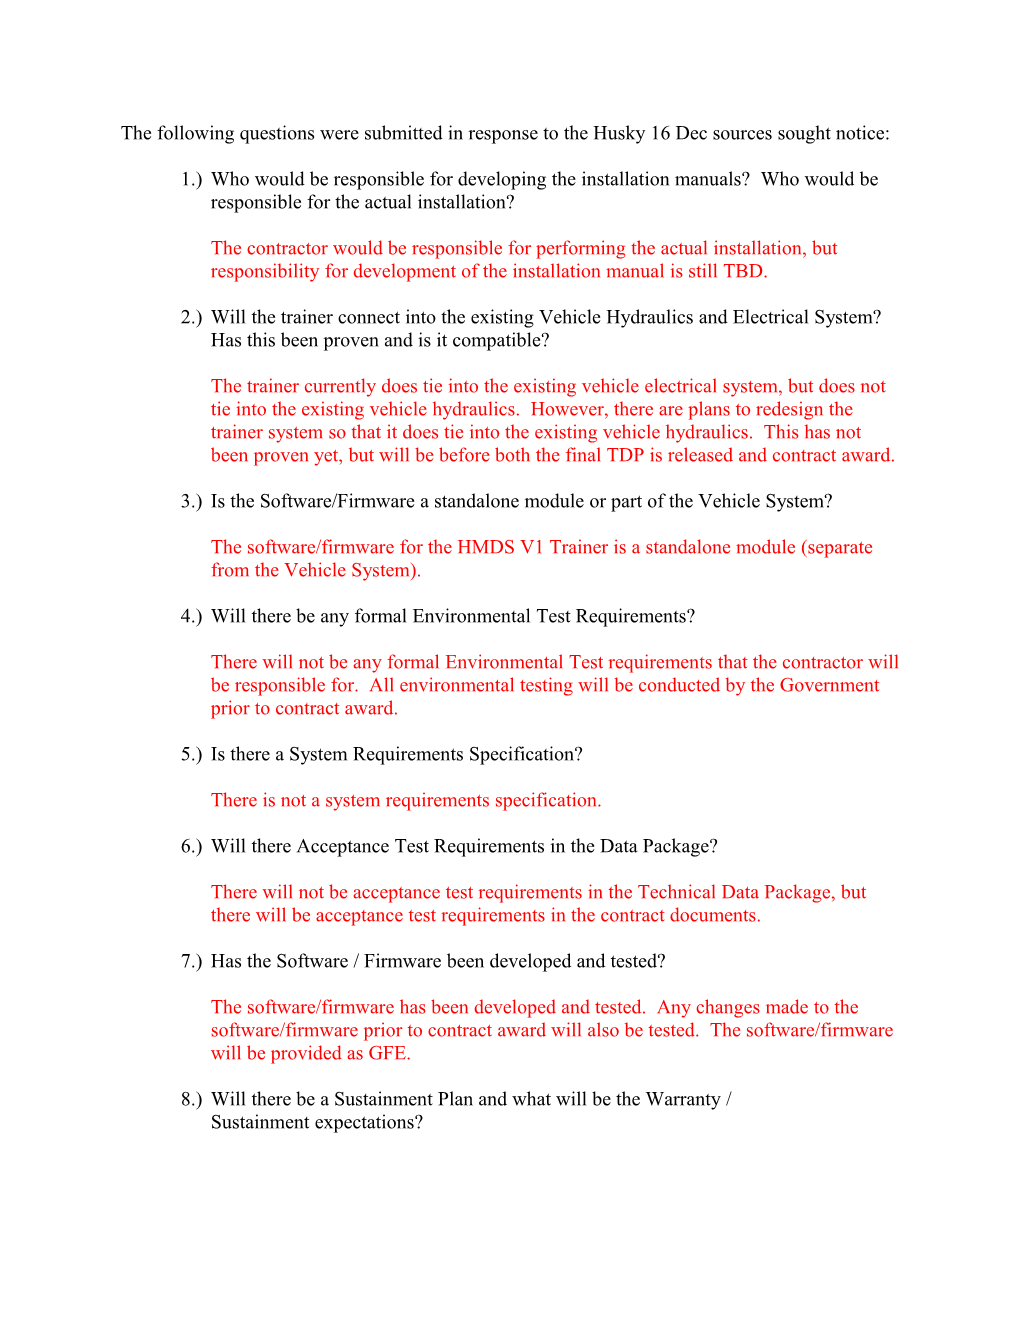 The Following Questions Were Submitted in Response to the Husky 16 Dec Sources Sought Notice